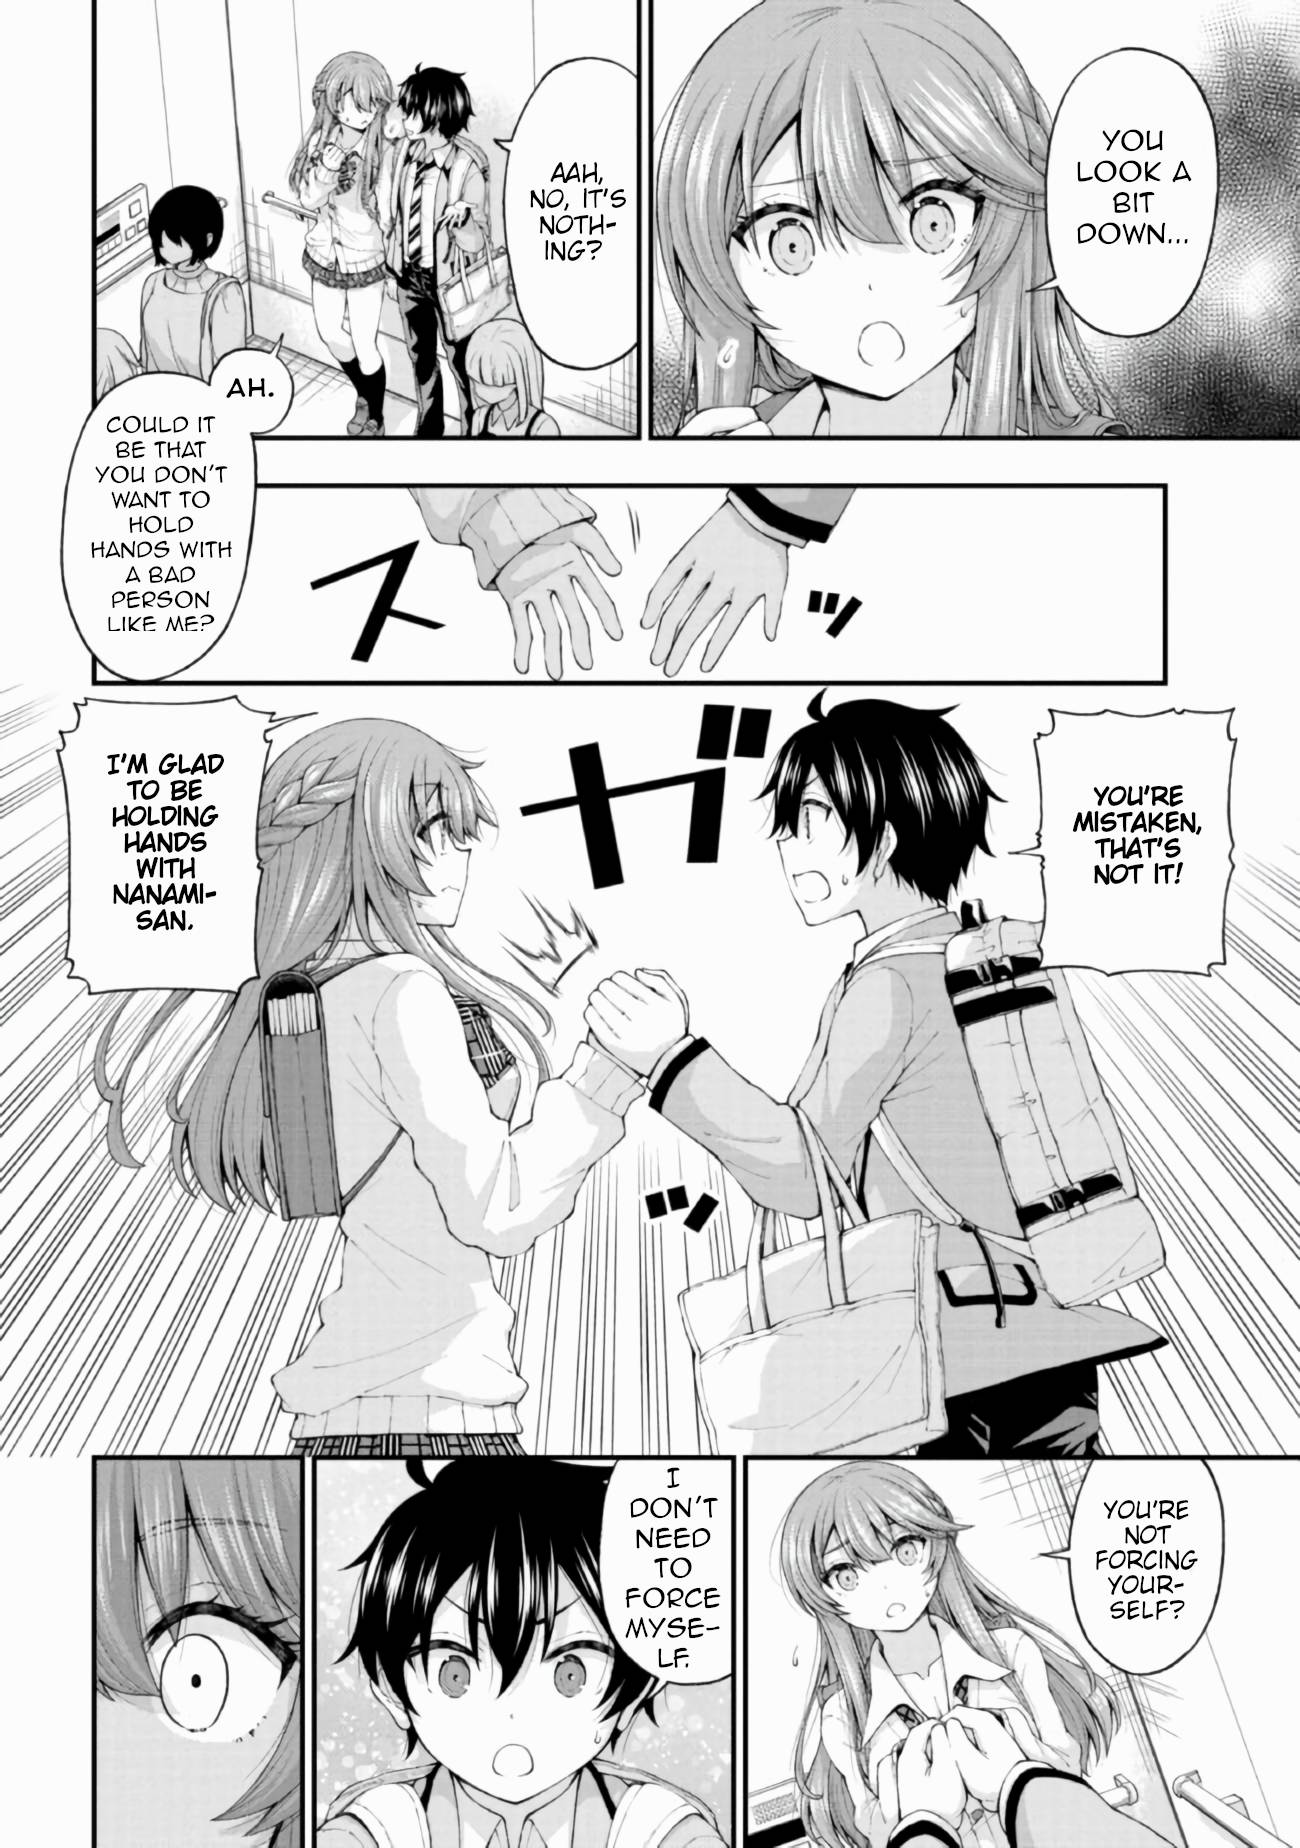 The Gal Who Was Meant to Confess to Me as a Game Punishment - chapter 4 - #2